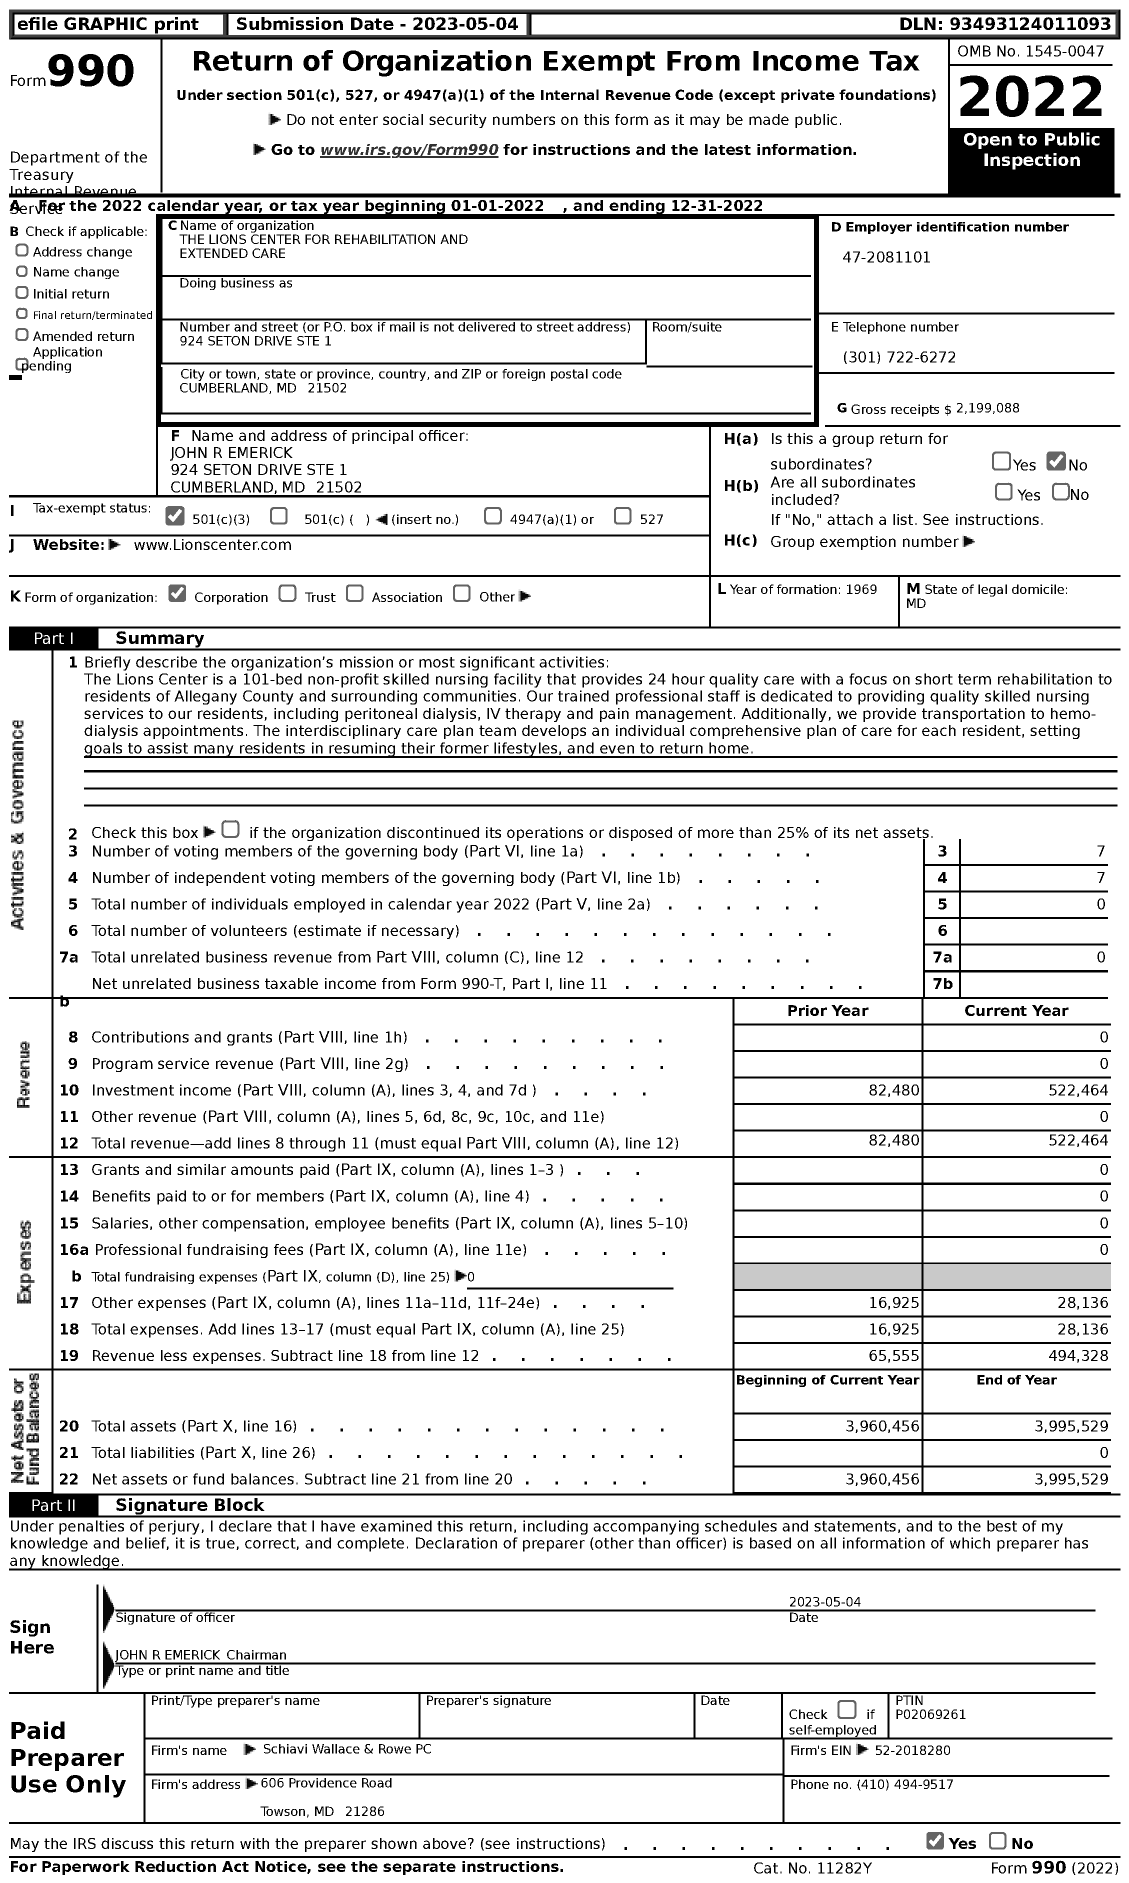 Image of first page of 2022 Form 990 for The Lions Center for Rehabilitation and Extended Care